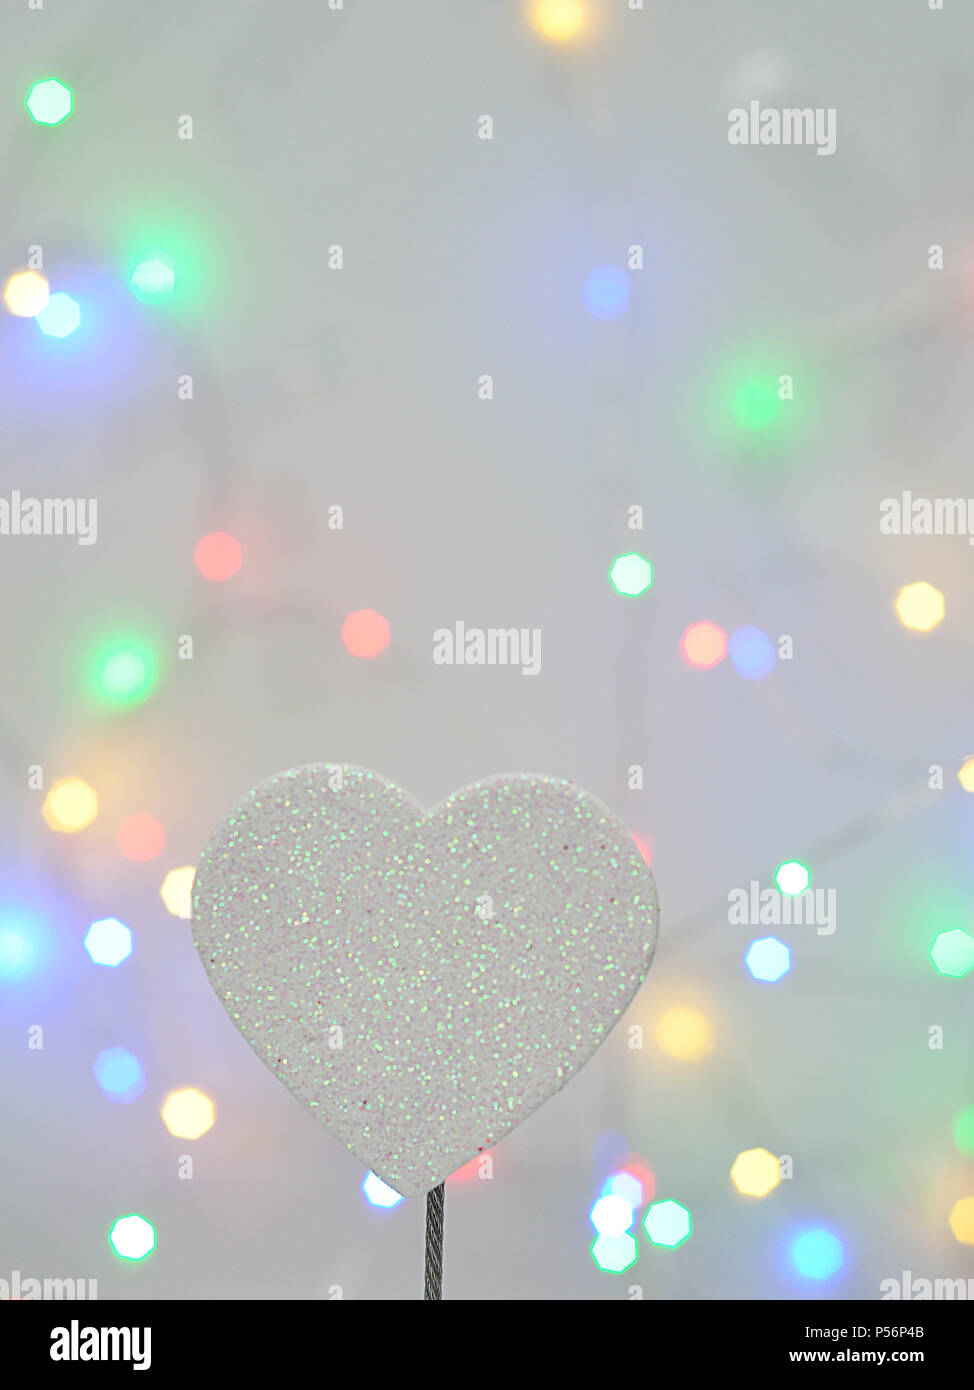 A white glitter heart isolated against an out of focus light background  Stock Photo - Alamy